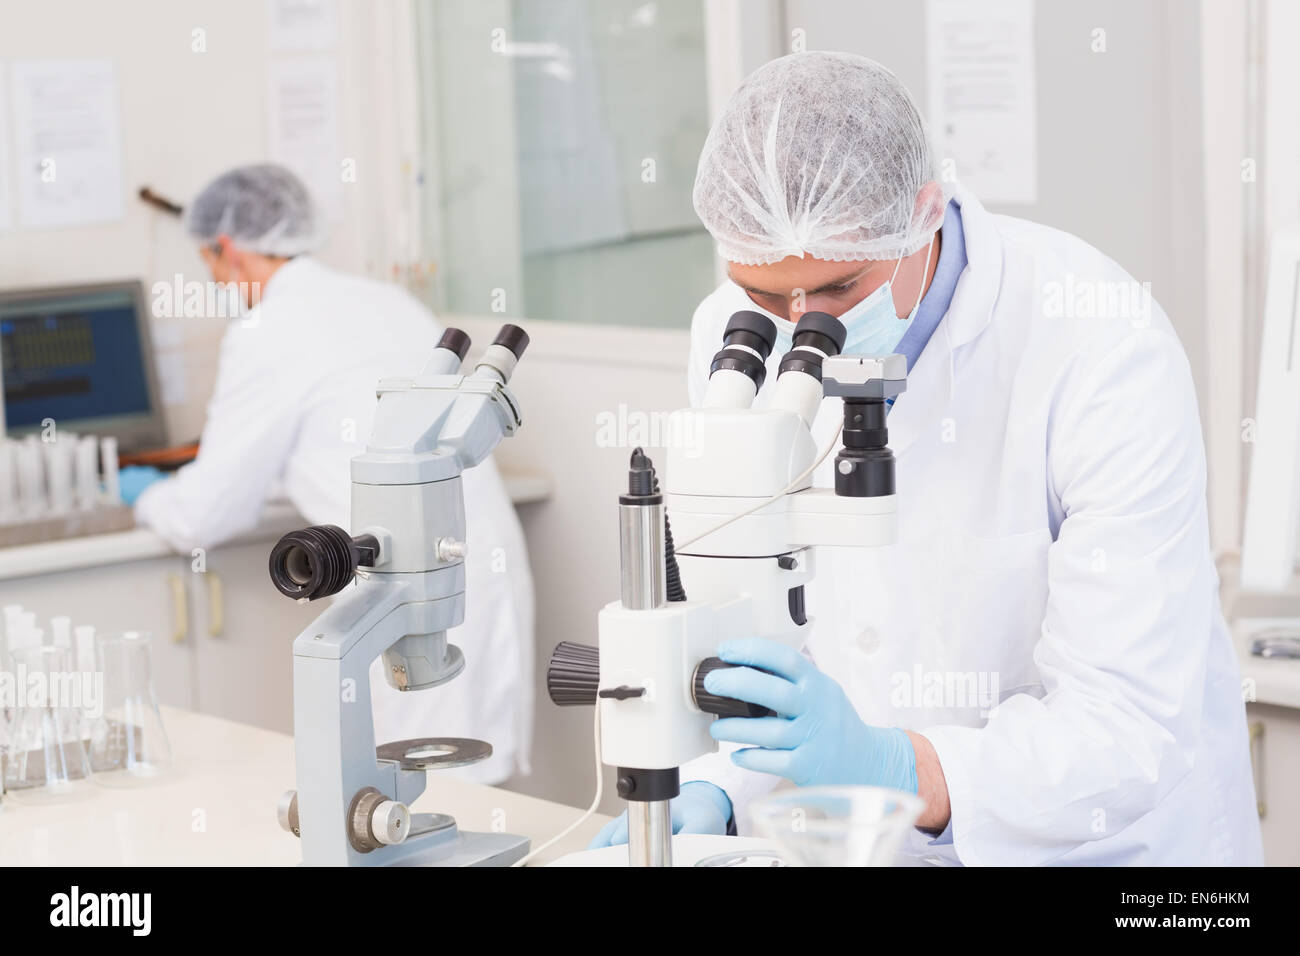 Scientists working attentively with microscopes Stock Photo